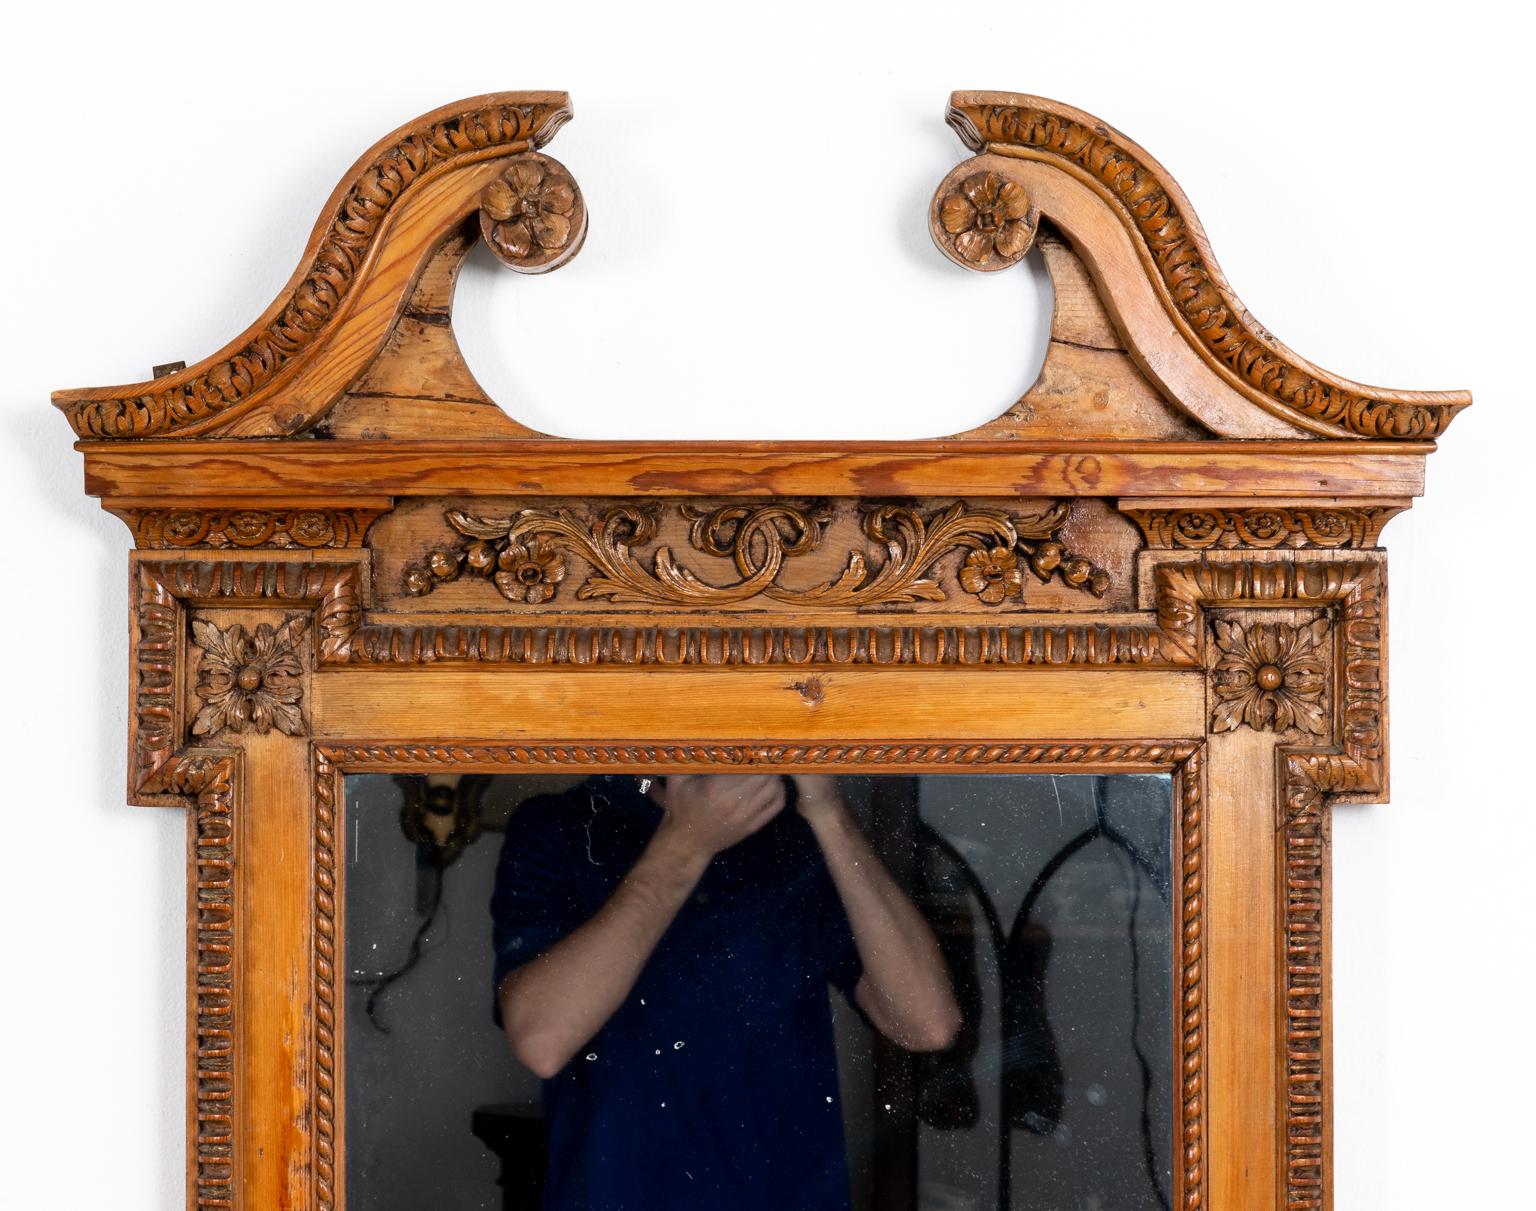 Circa late 19th century Biedermeier style mirror in carved wood with top broken scroll pediment detail. The piece is also heavily decorated with motifs such as scrolled foliage underneath the pediment, dog ear corners, and rope trim surrounding the